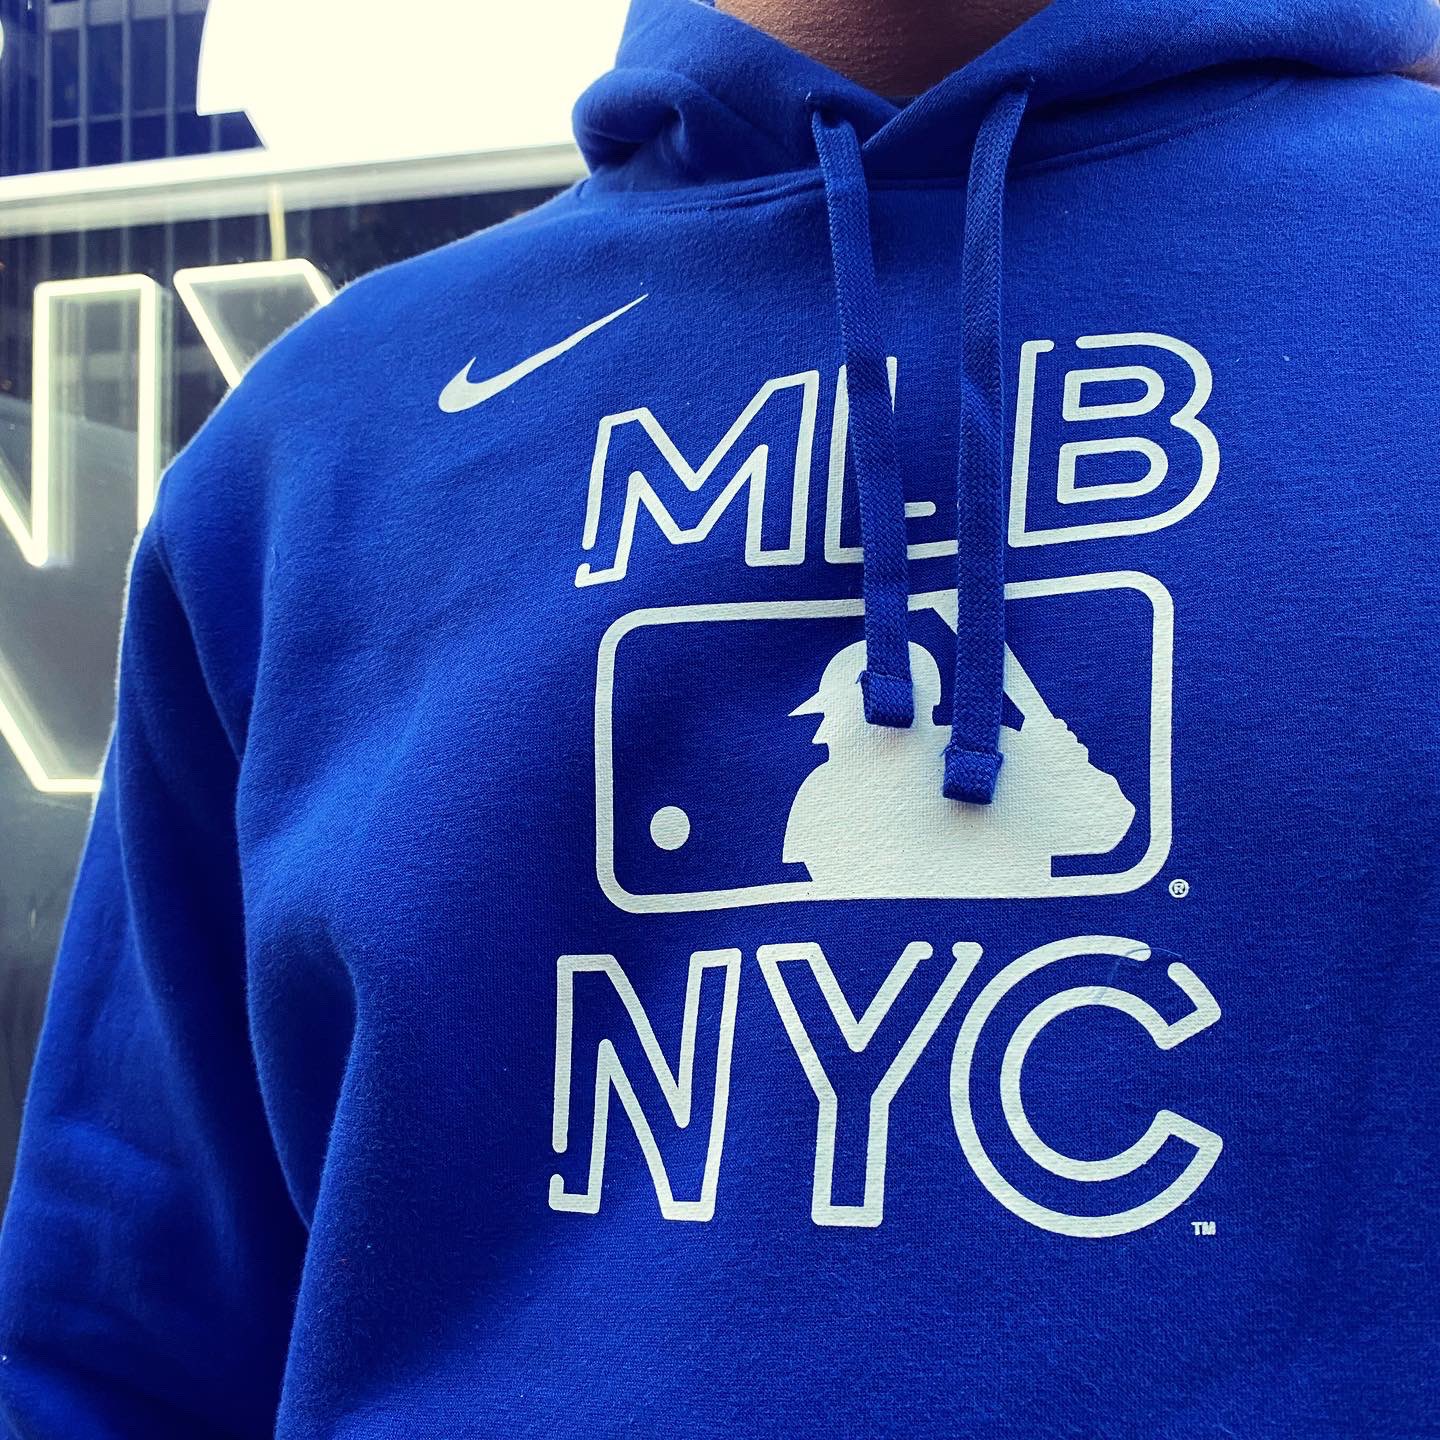 MLB Flagship Store opens in NYC, features photo booth